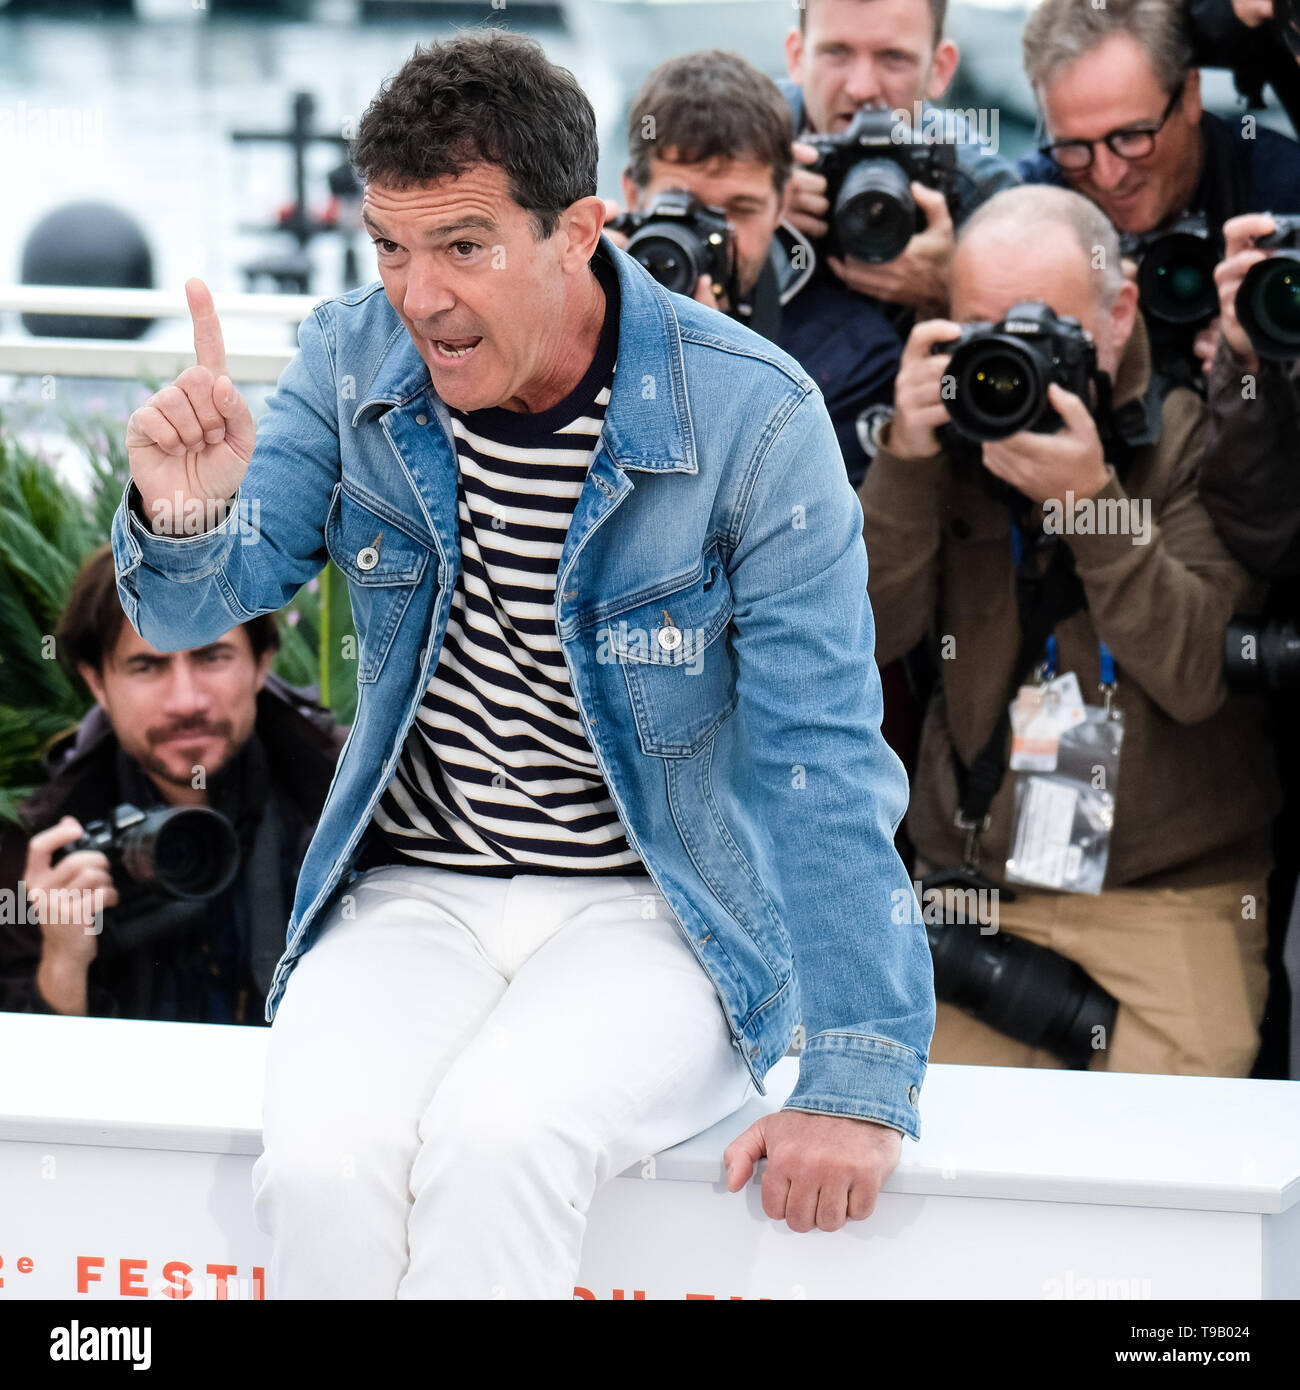 Cannes, France. 18th May, 2019. Antonio Banderas poses at a photocall for Pain and Glory (Dolor y gloria ) on Saturday 18 May 2019 at the 72nd Festival de Cannes, Palais des Festivals, Cannes. Pictured: Antonio Banderas. Picture by Credit: Julie Edwards/Alamy Live News Stock Photo